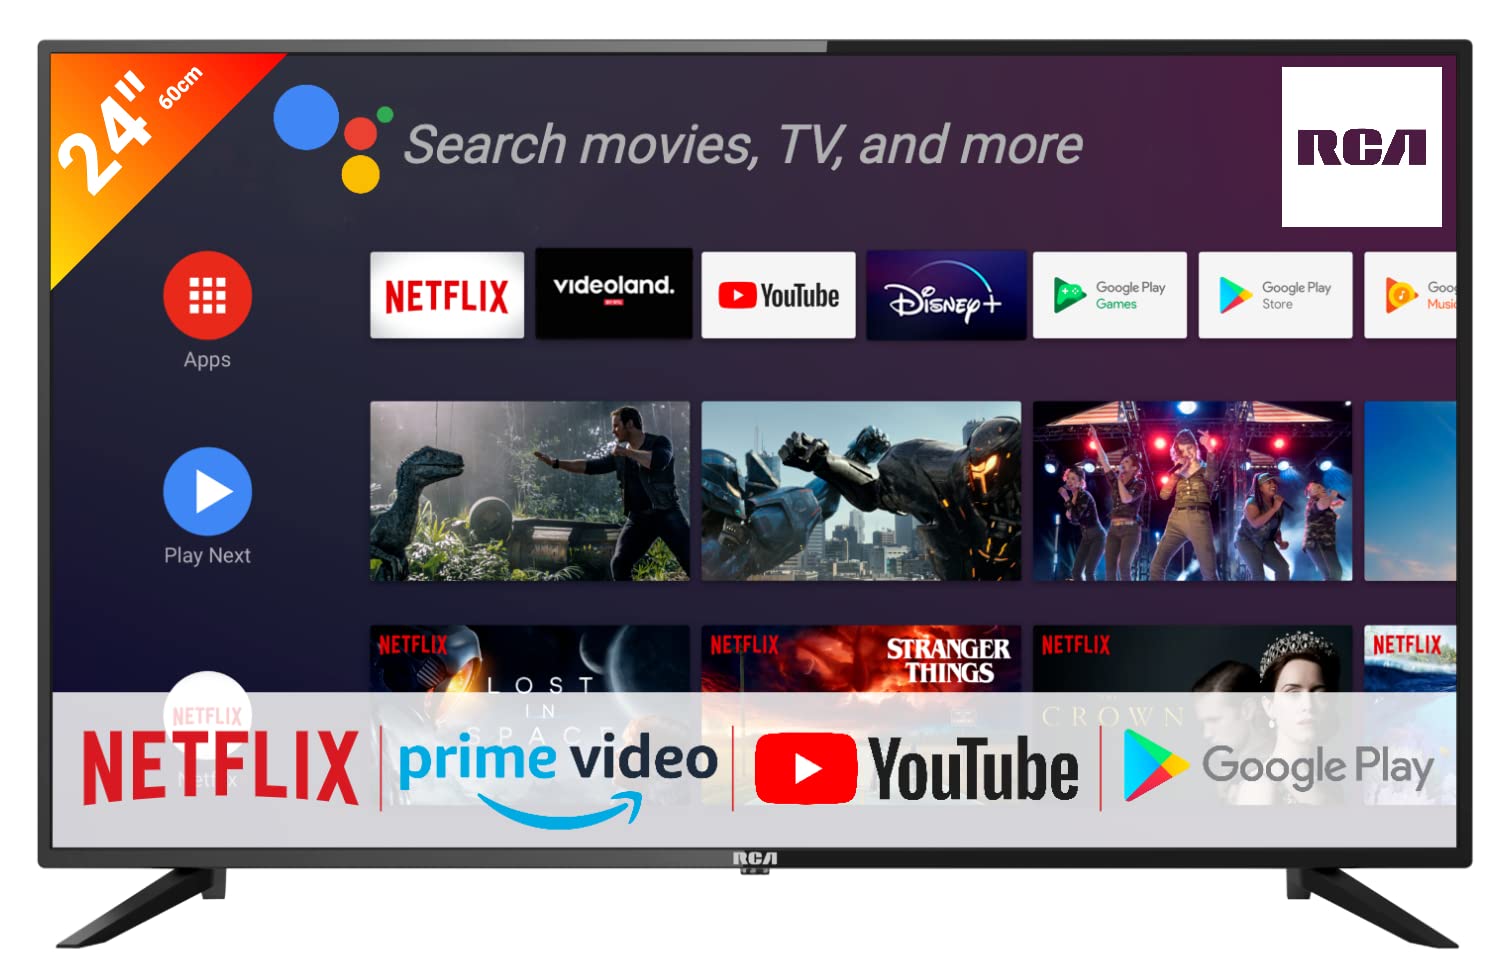 RS24H1-UK Android Smart TV, 24 inch, Google Assistant, Chromecast, Prime Video, Netflix, Disney+, Google Play Store, remote control with microphone, triple tuner, Freeview